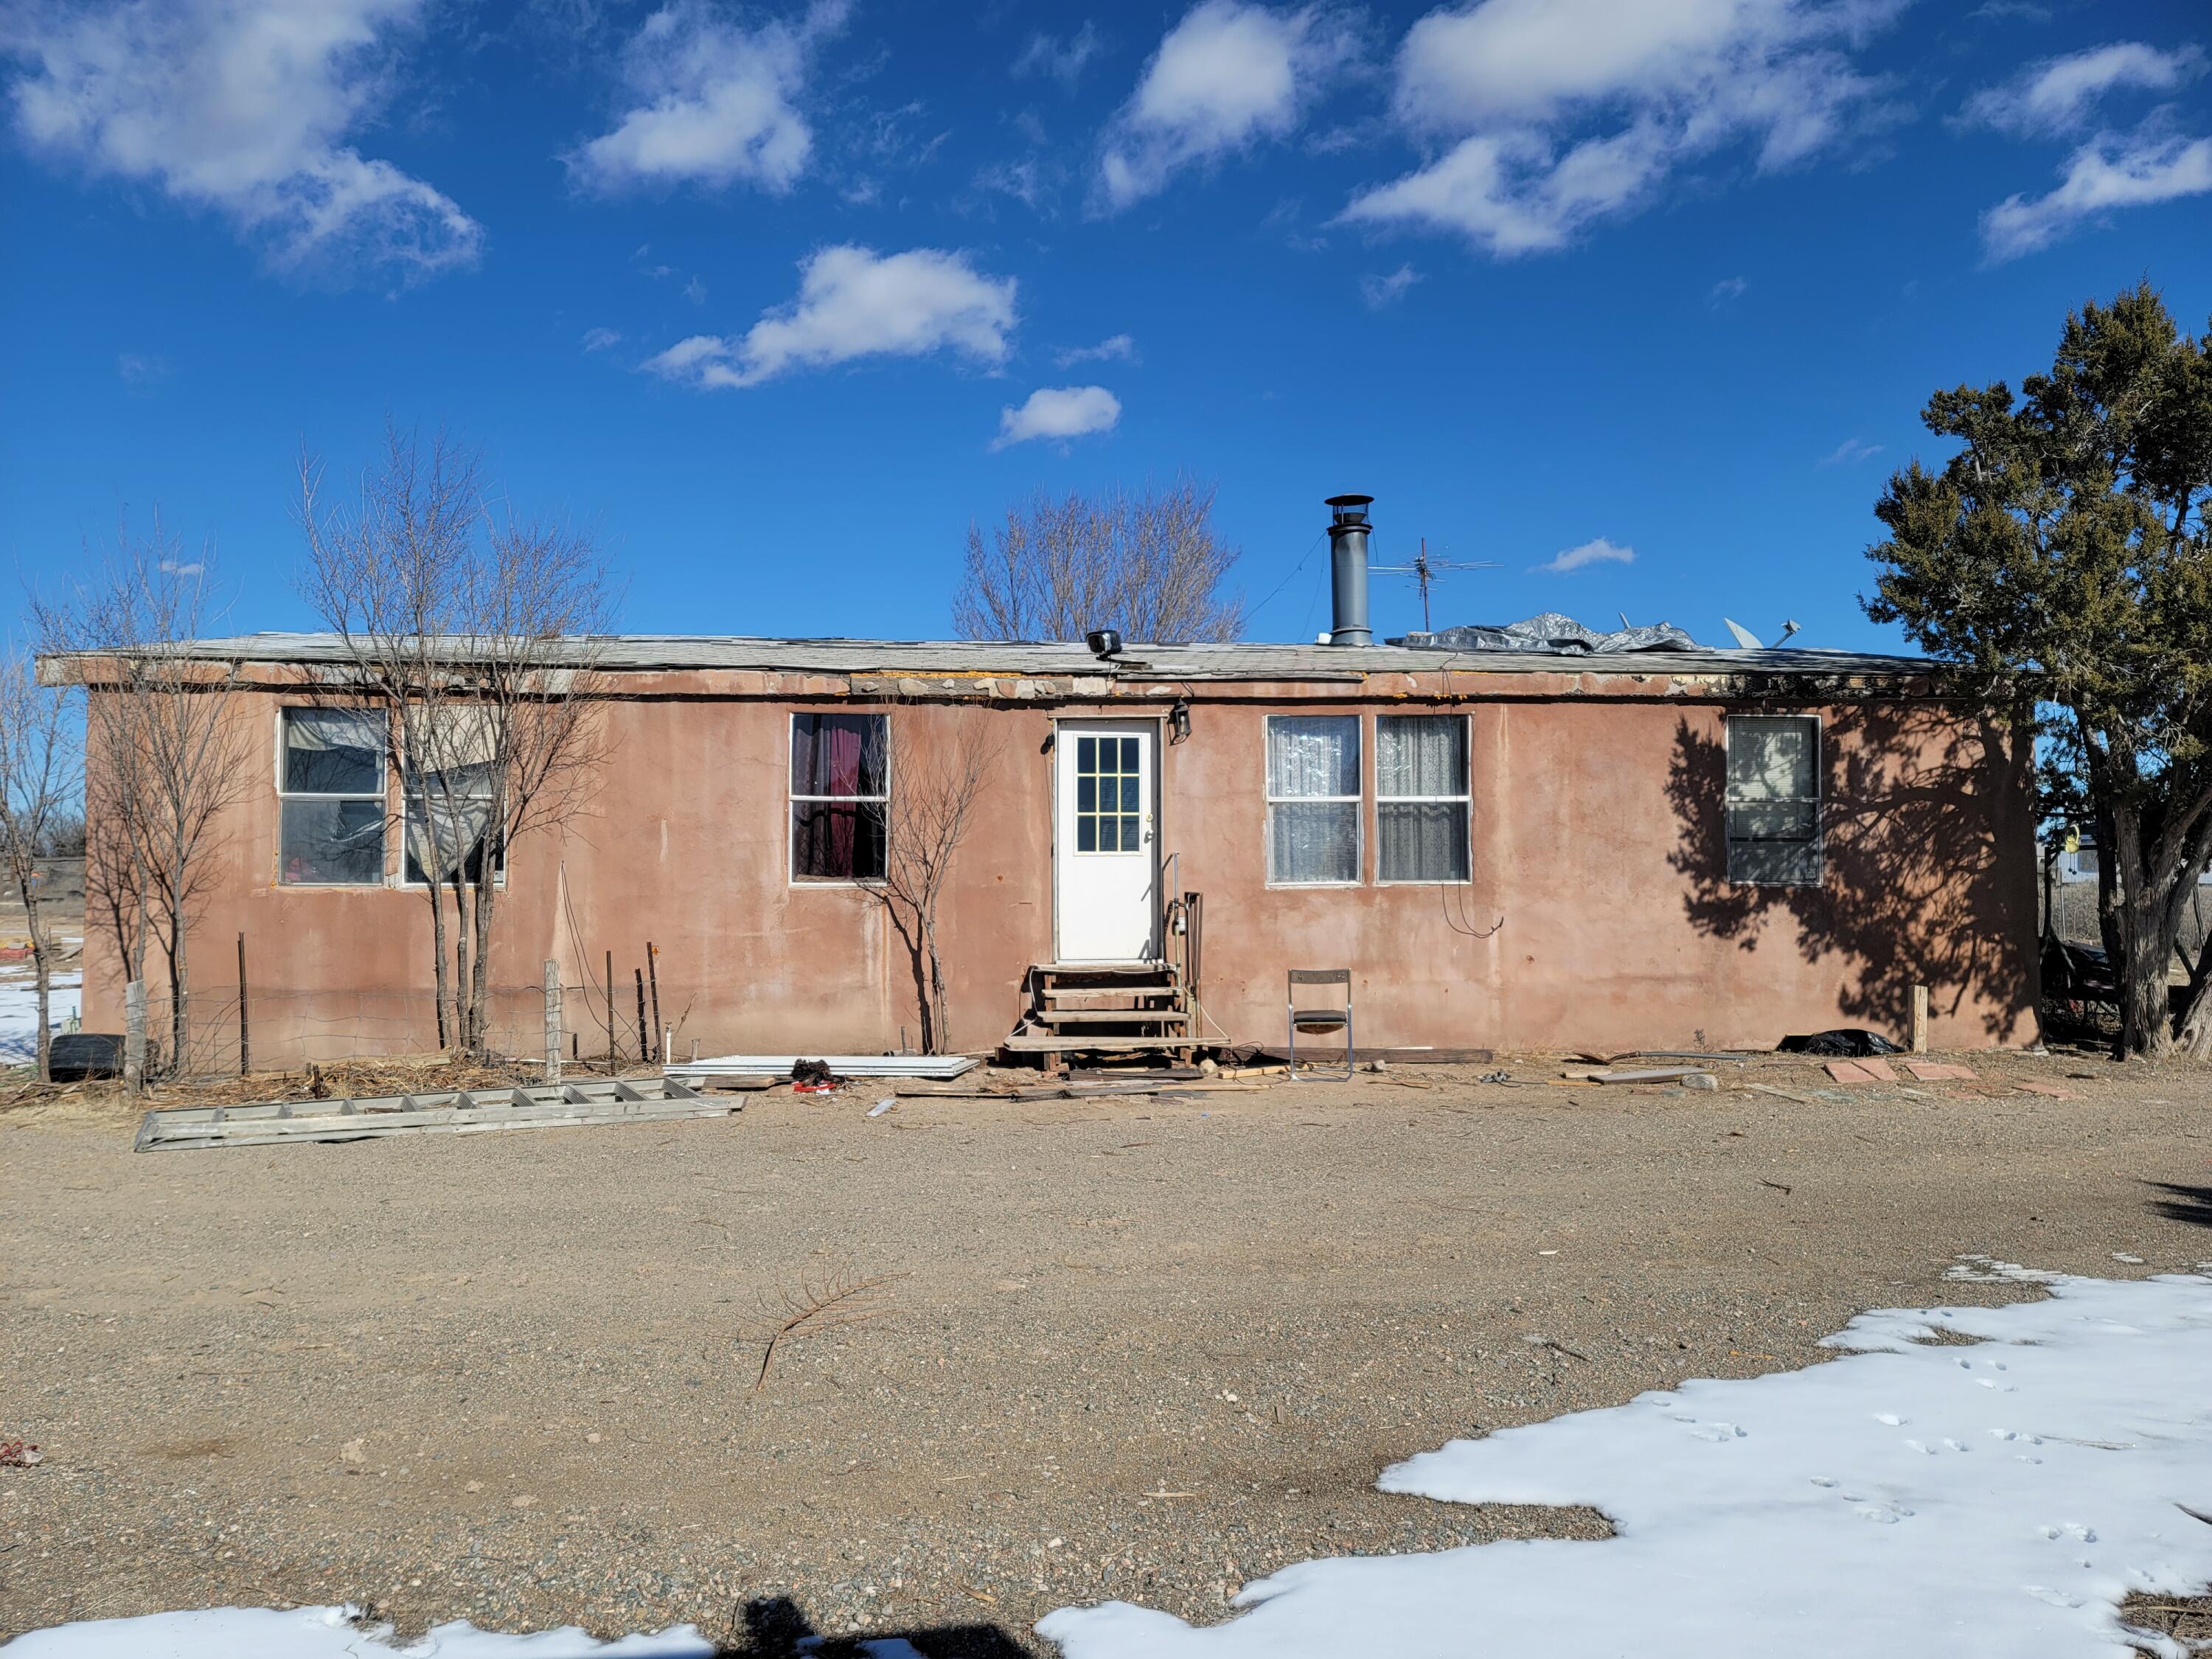 East mountain opportunity to fix up on 1 acre fully fenced.  3 bedrooms, bathrooms home has stucco. Property being sold in as is condition. Cash or renovation loan possible. Contact your favorite REALTOR to view this property and start investing in your future